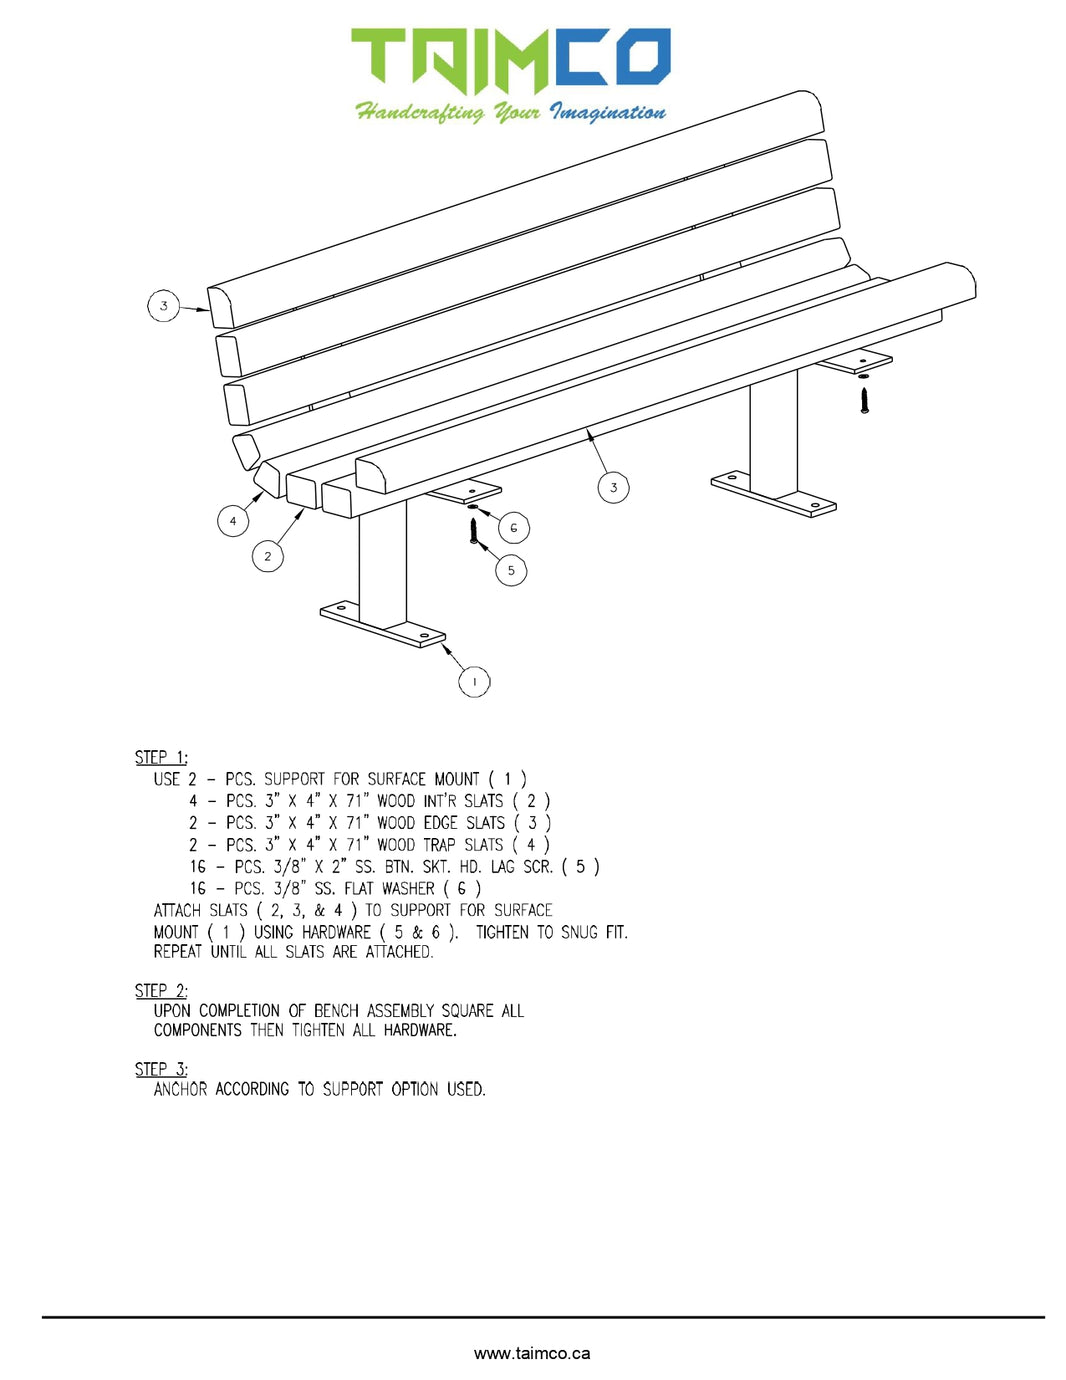 Wood Bench With Steel Tube Legs and Feet | Model MB207